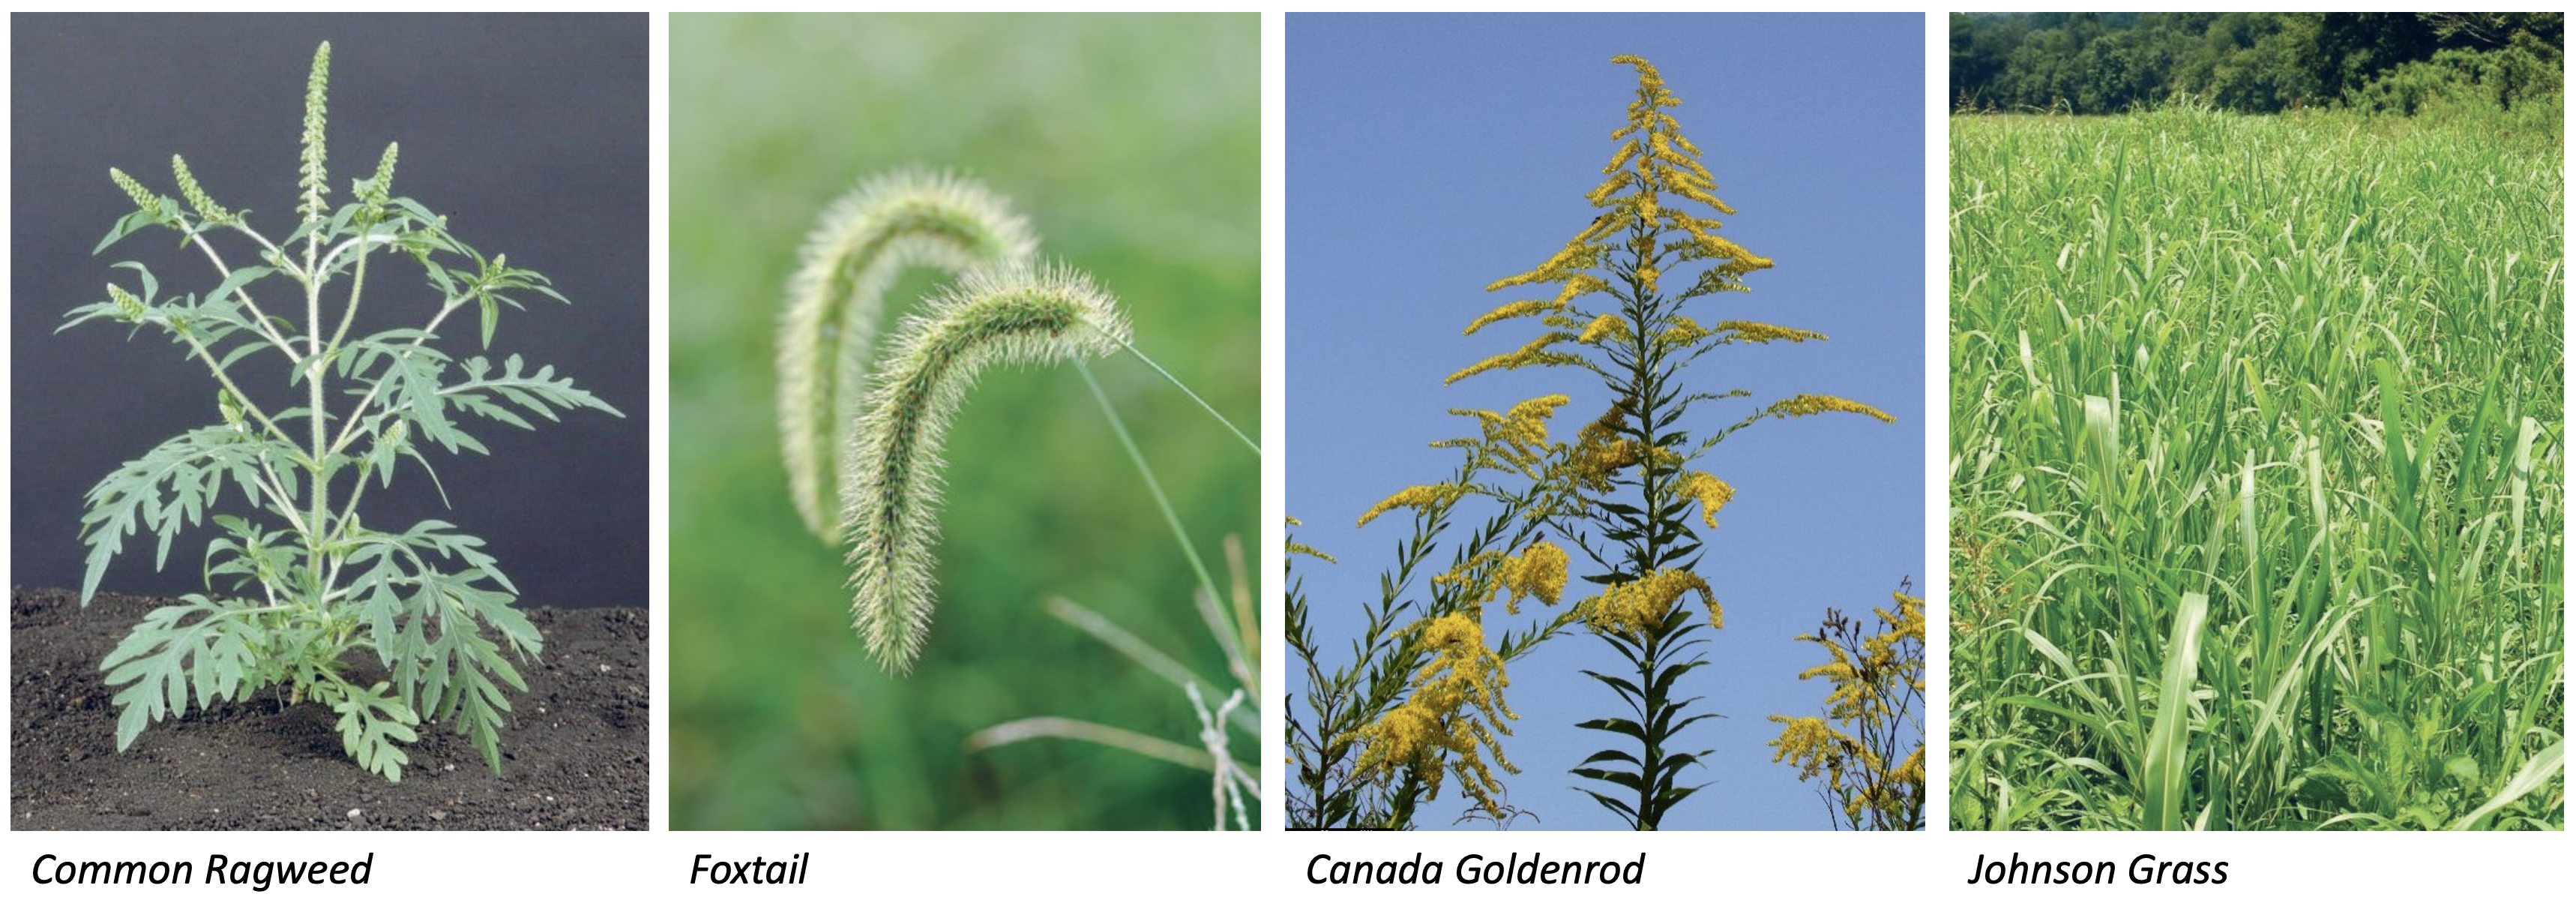 weeds-ragweed-foxtail-canada-goldenrod-johnson-grass